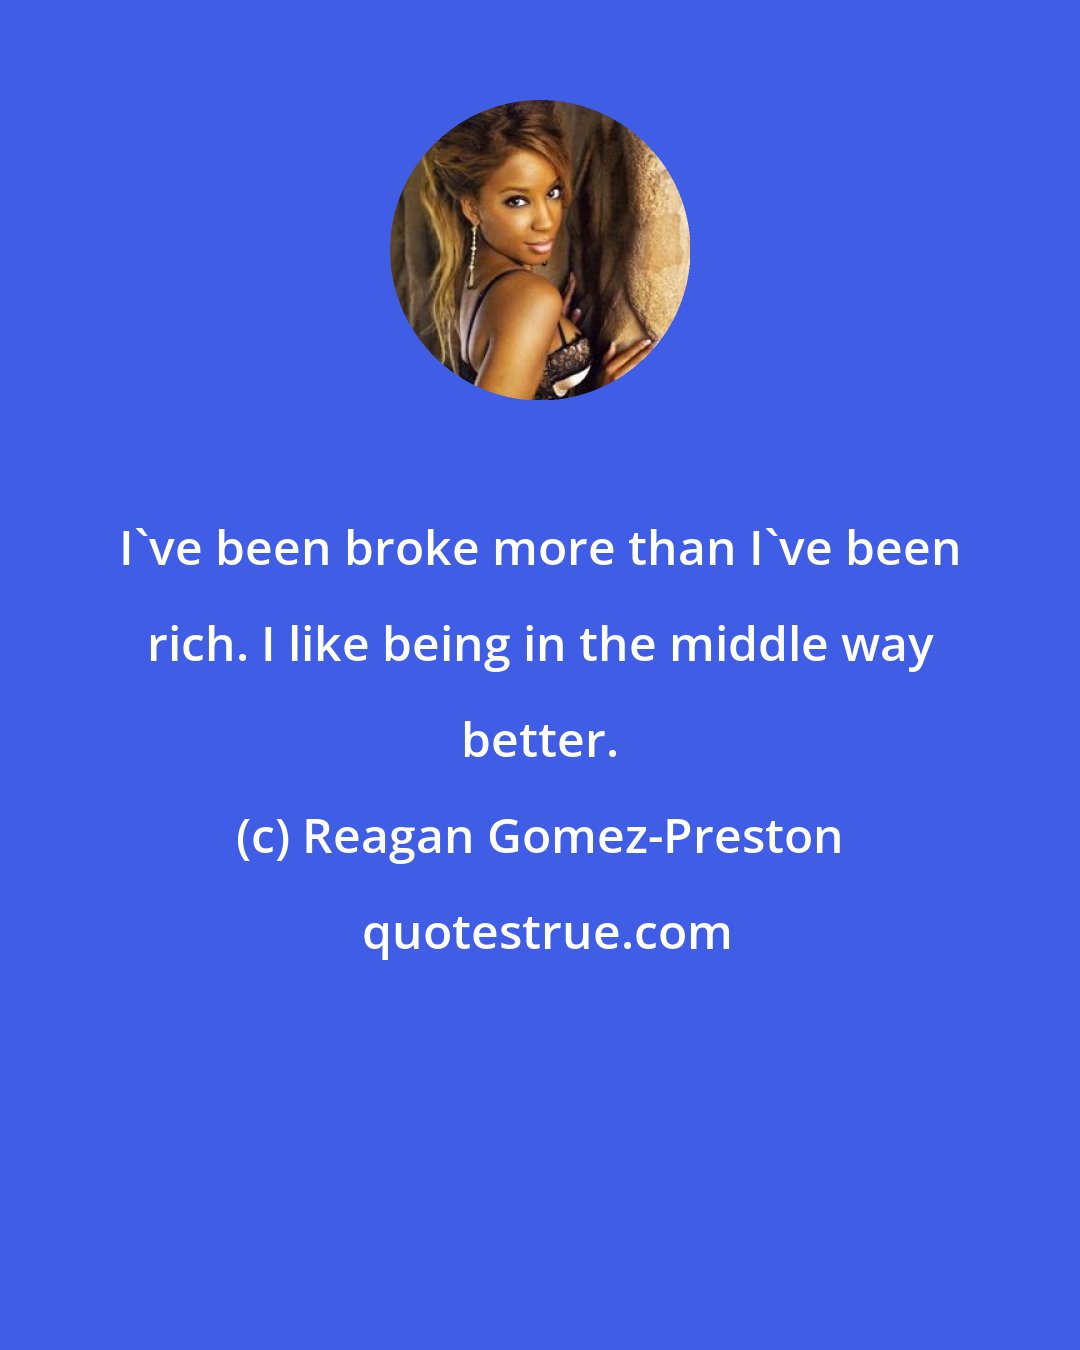 Reagan Gomez-Preston: I've been broke more than I've been rich. I like being in the middle way better.